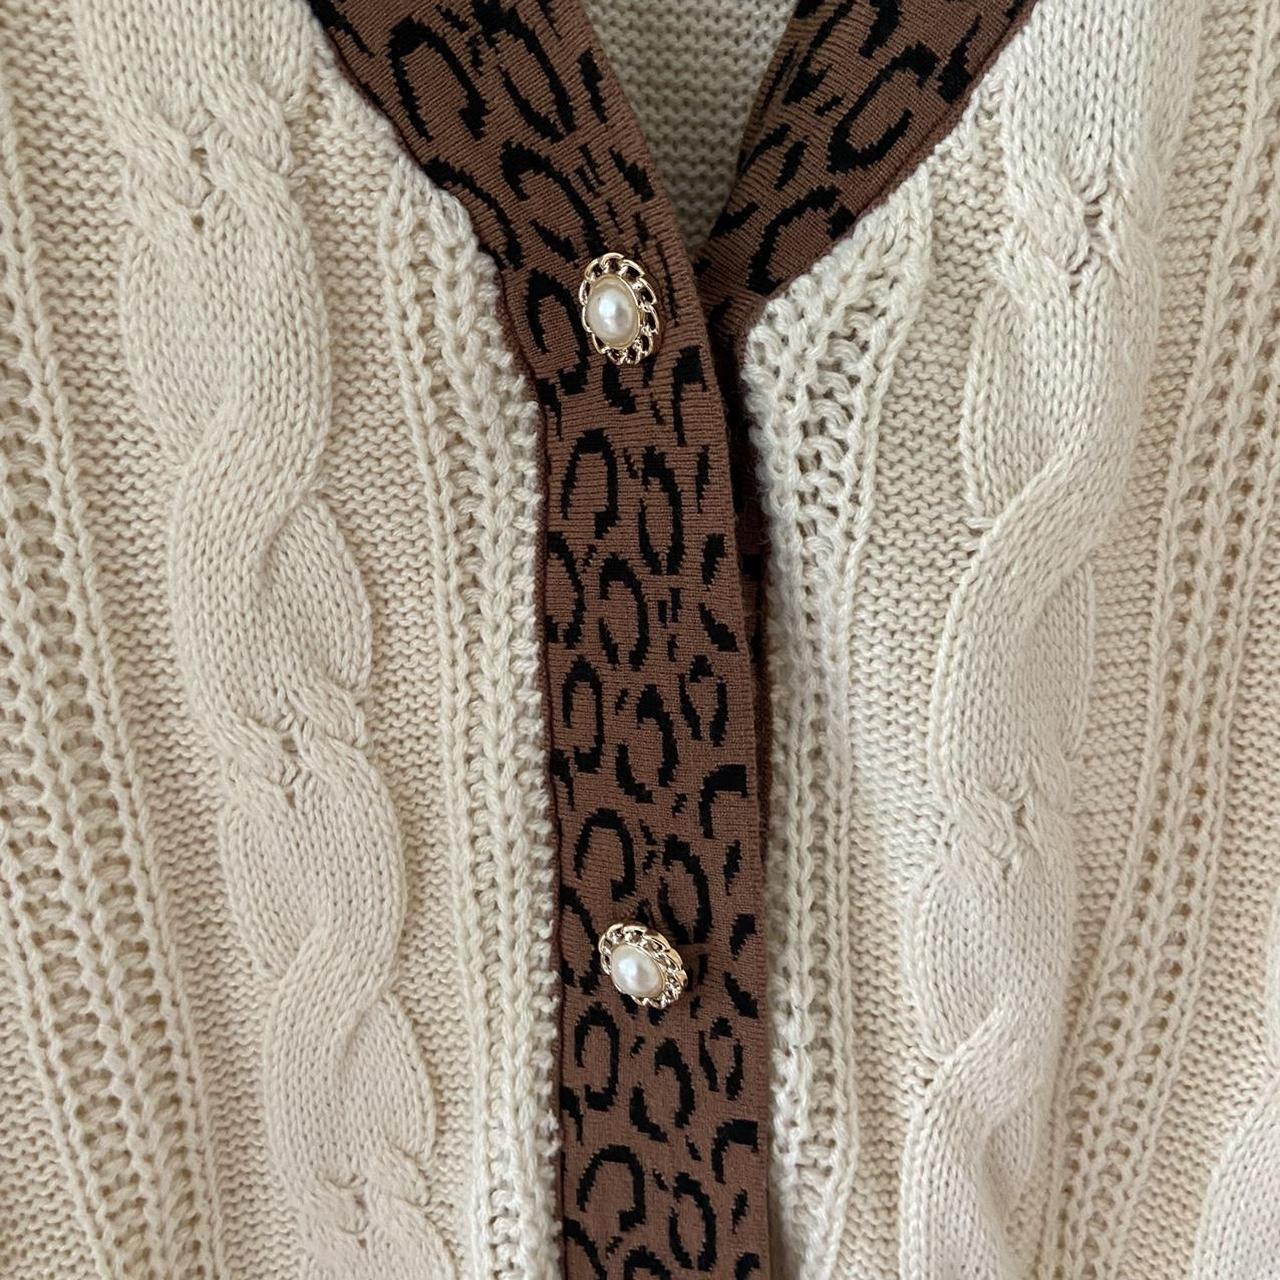 Product Image 2 - Cream cable knit cardigan with